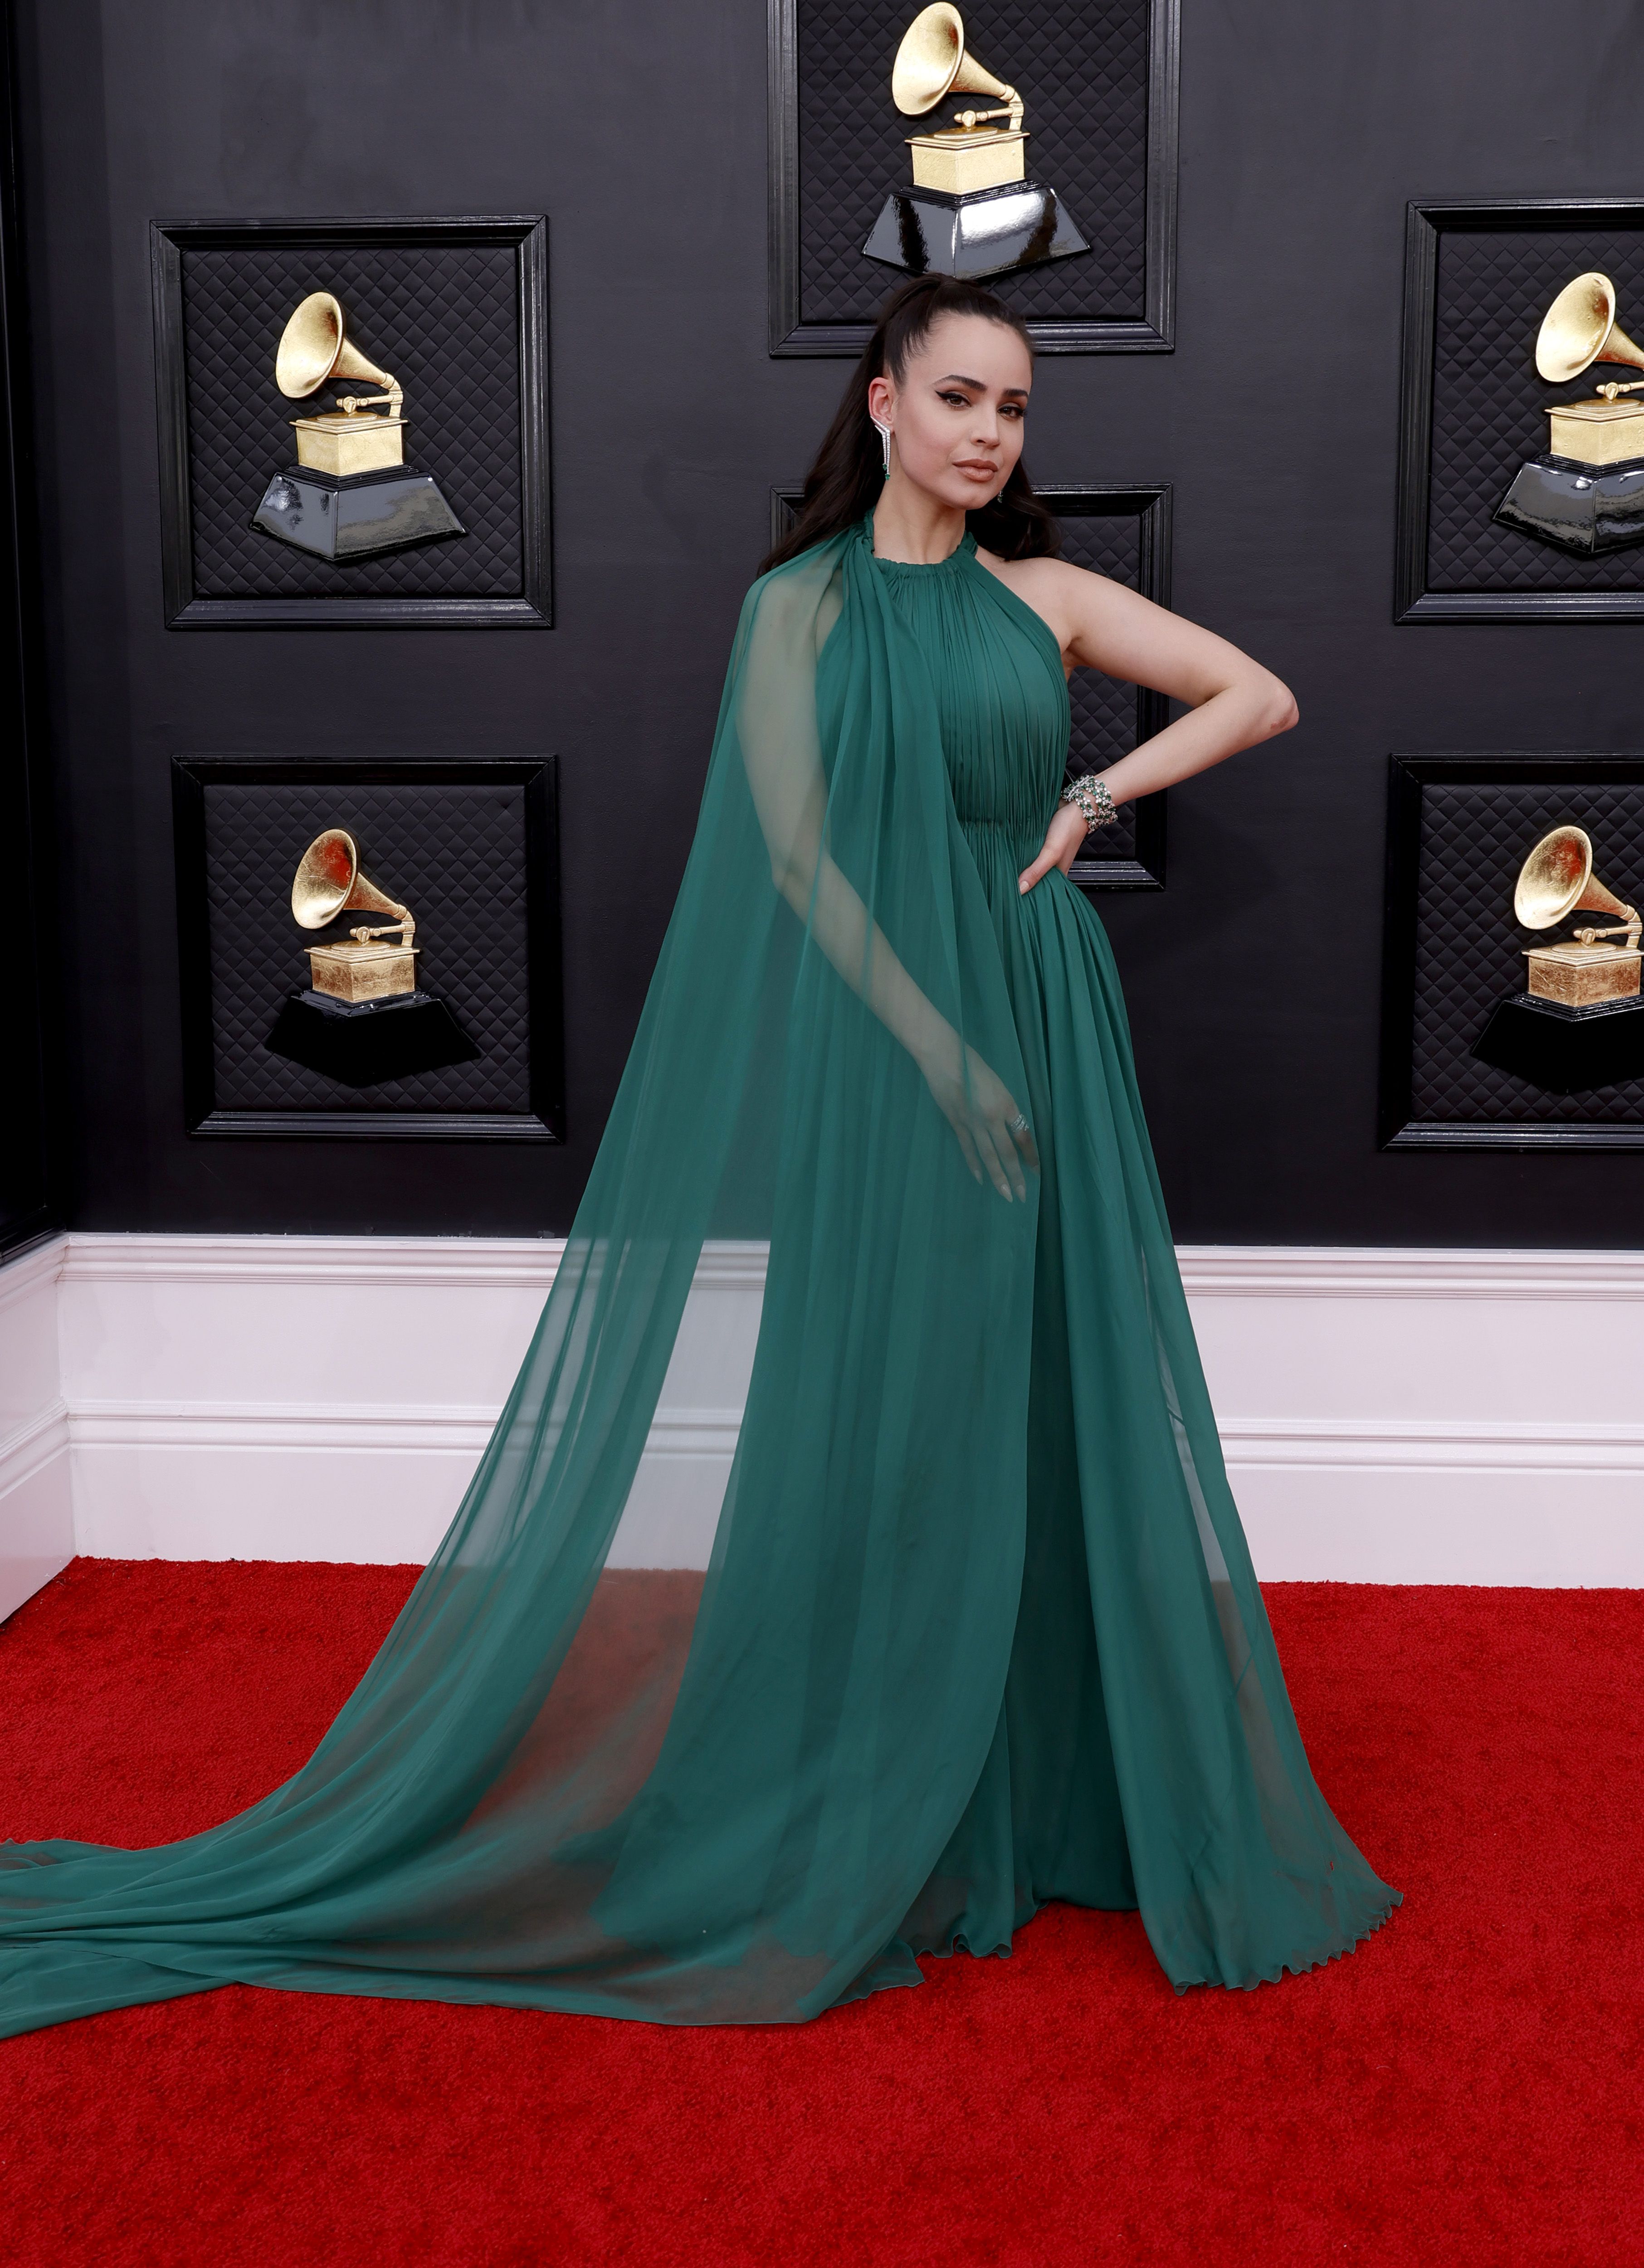 For #LiveFromE 's #RedCarpet coverage of the 2022 #Grammys I wore